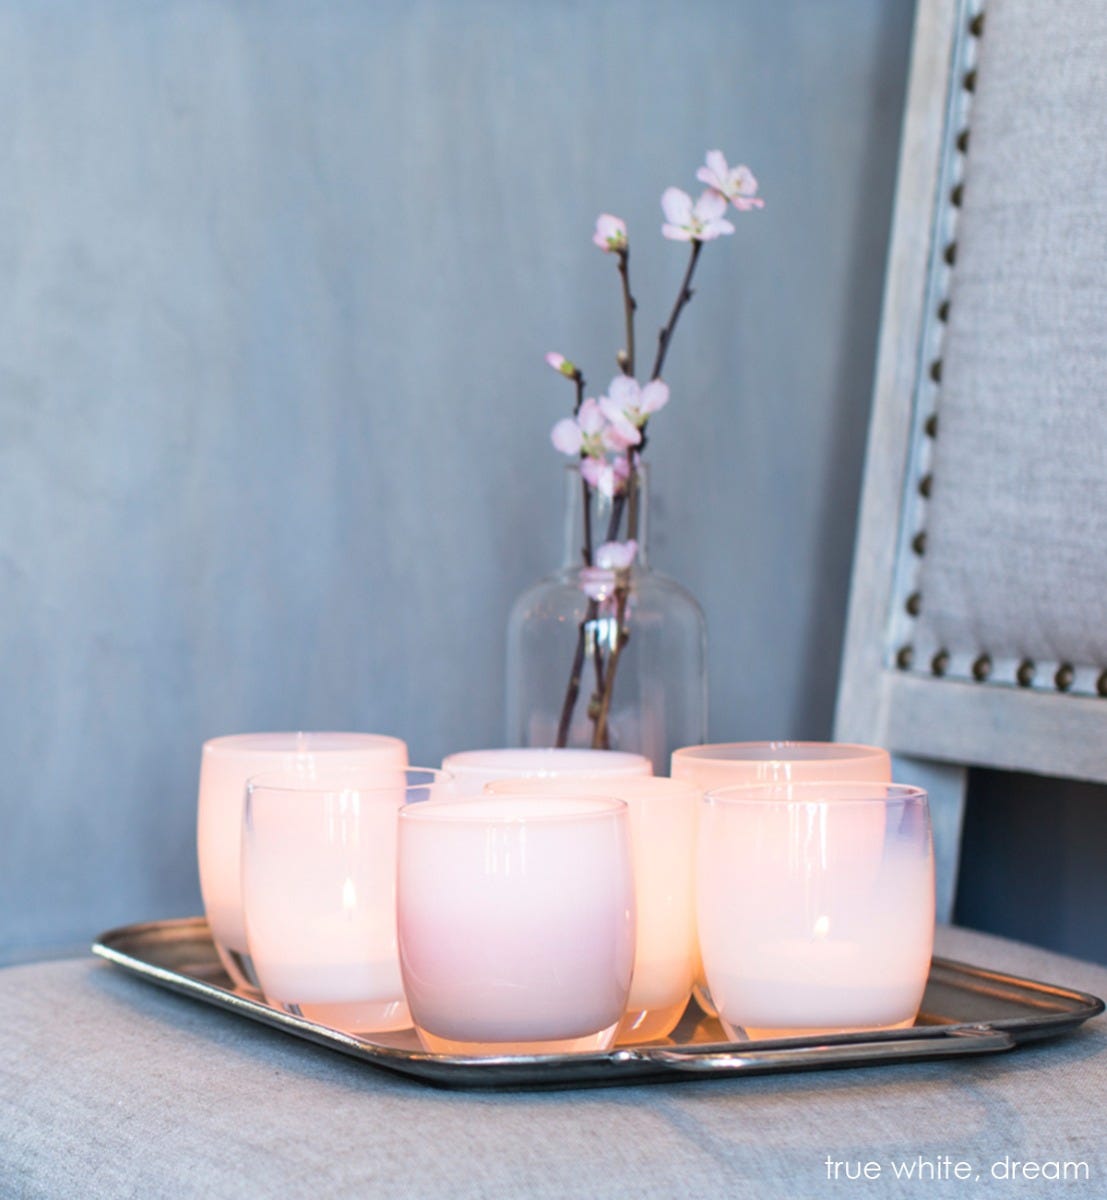 true white, opaque pinky white, hand-blown glass votive candle holder. Paired with dream.